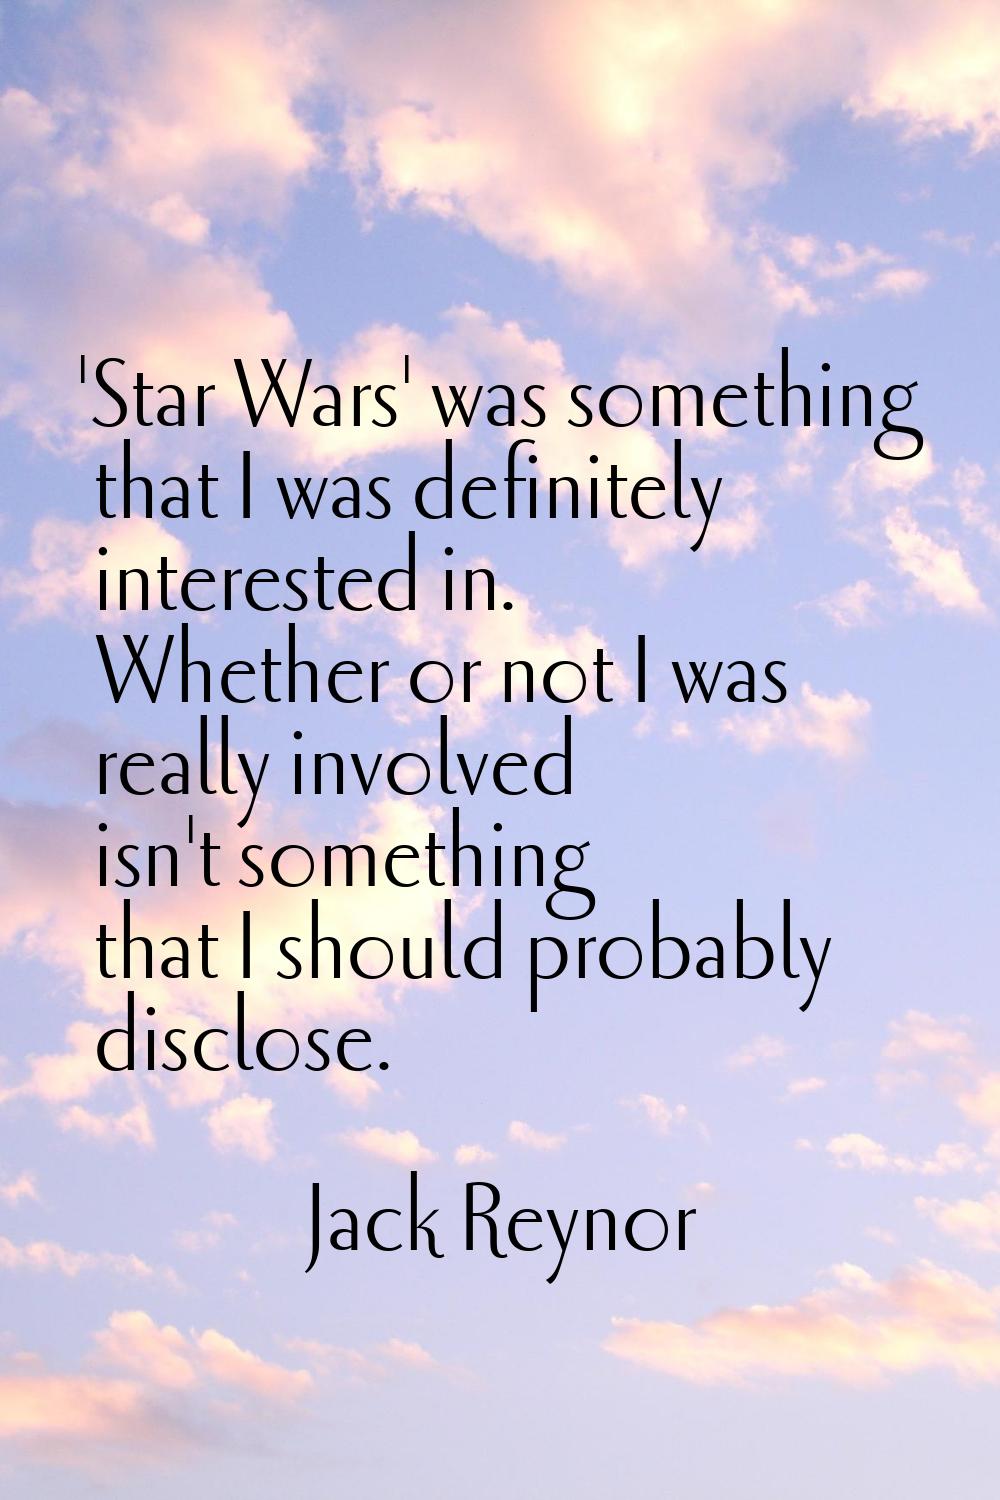 'Star Wars' was something that I was definitely interested in. Whether or not I was really involved